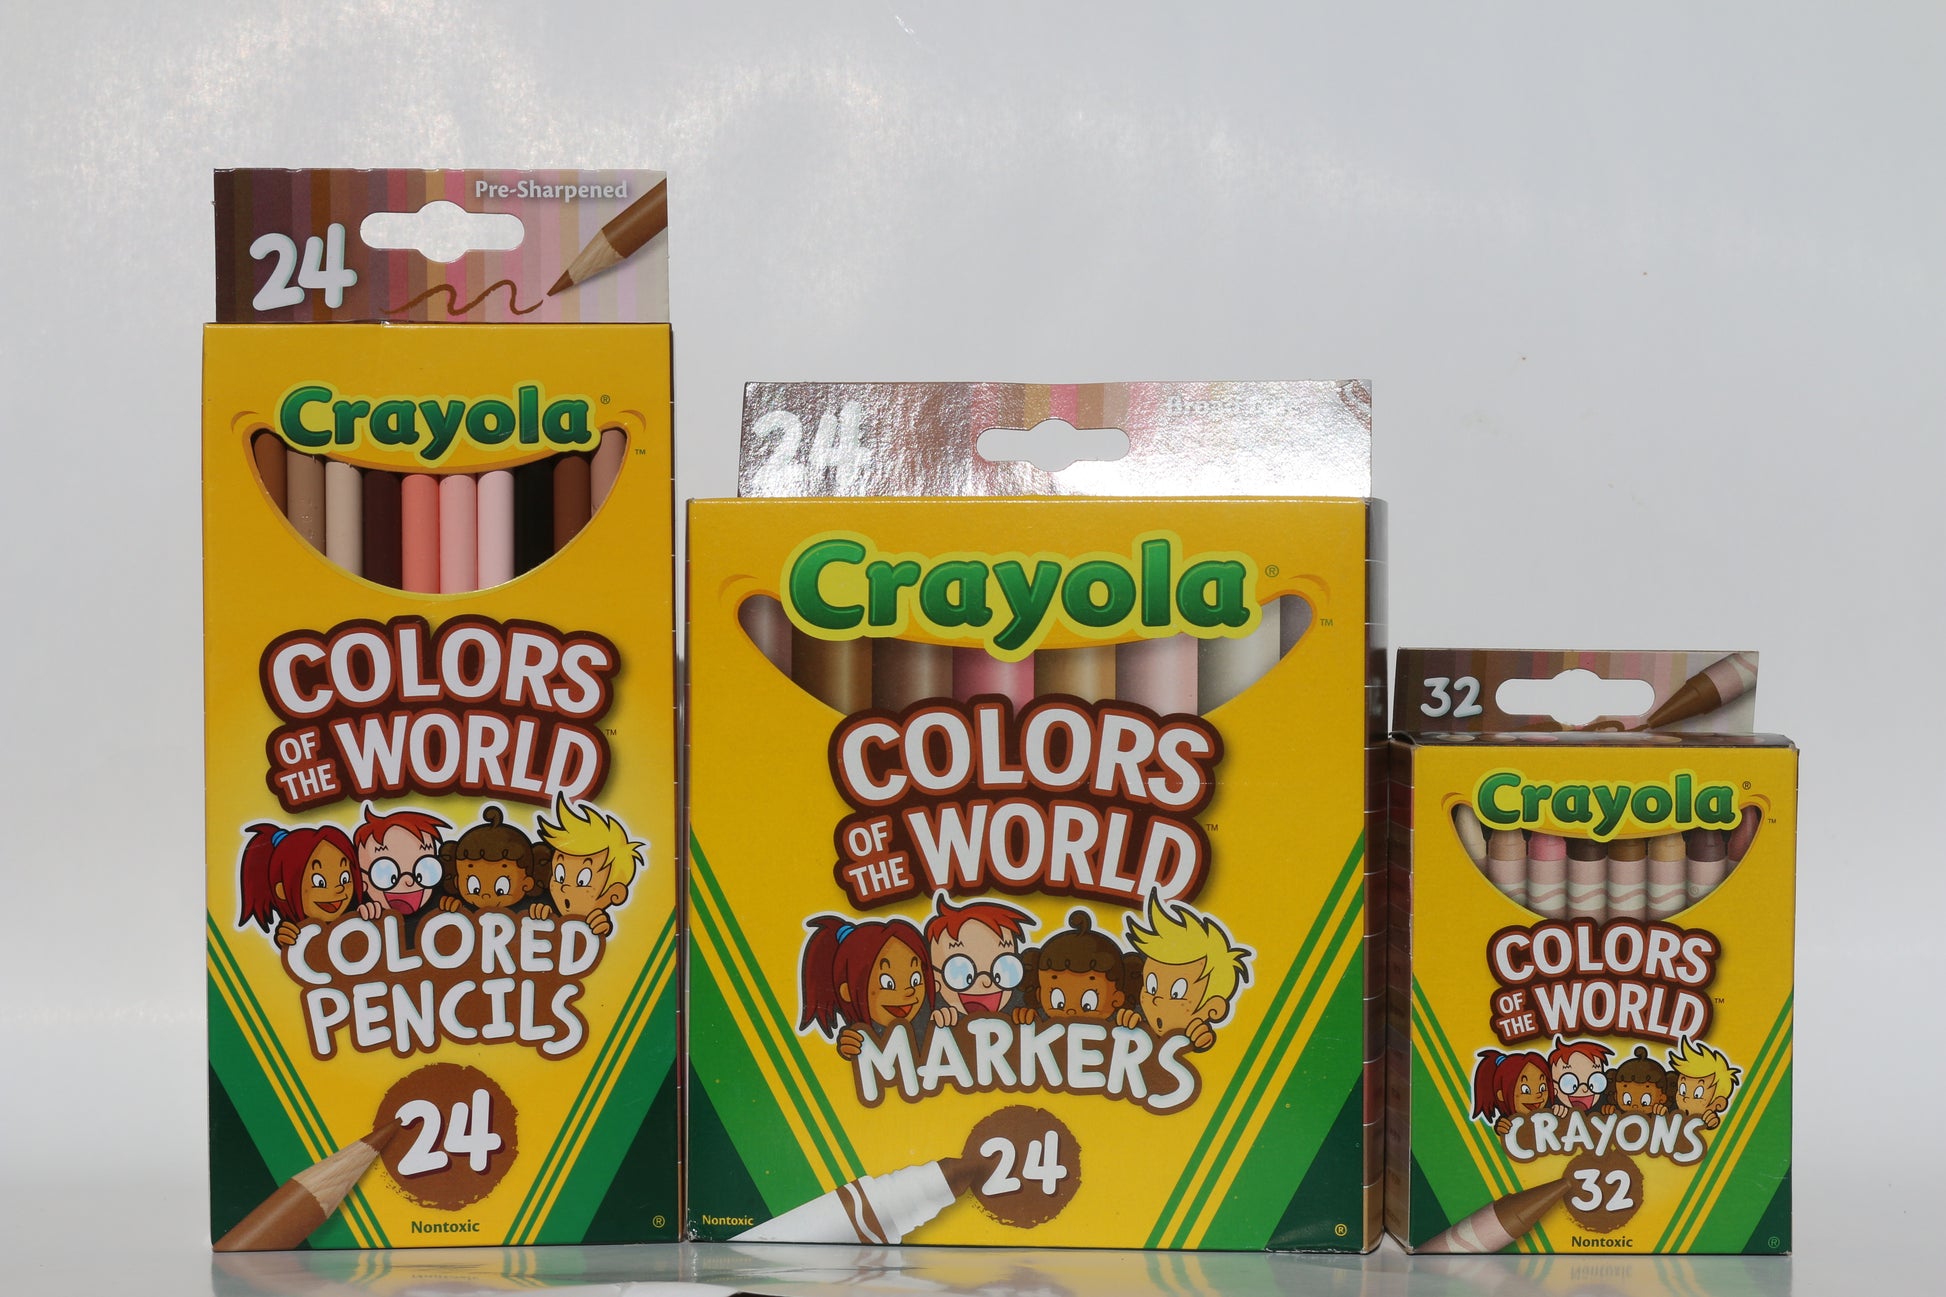 24 Crayola Colors of the World Colored Pencils